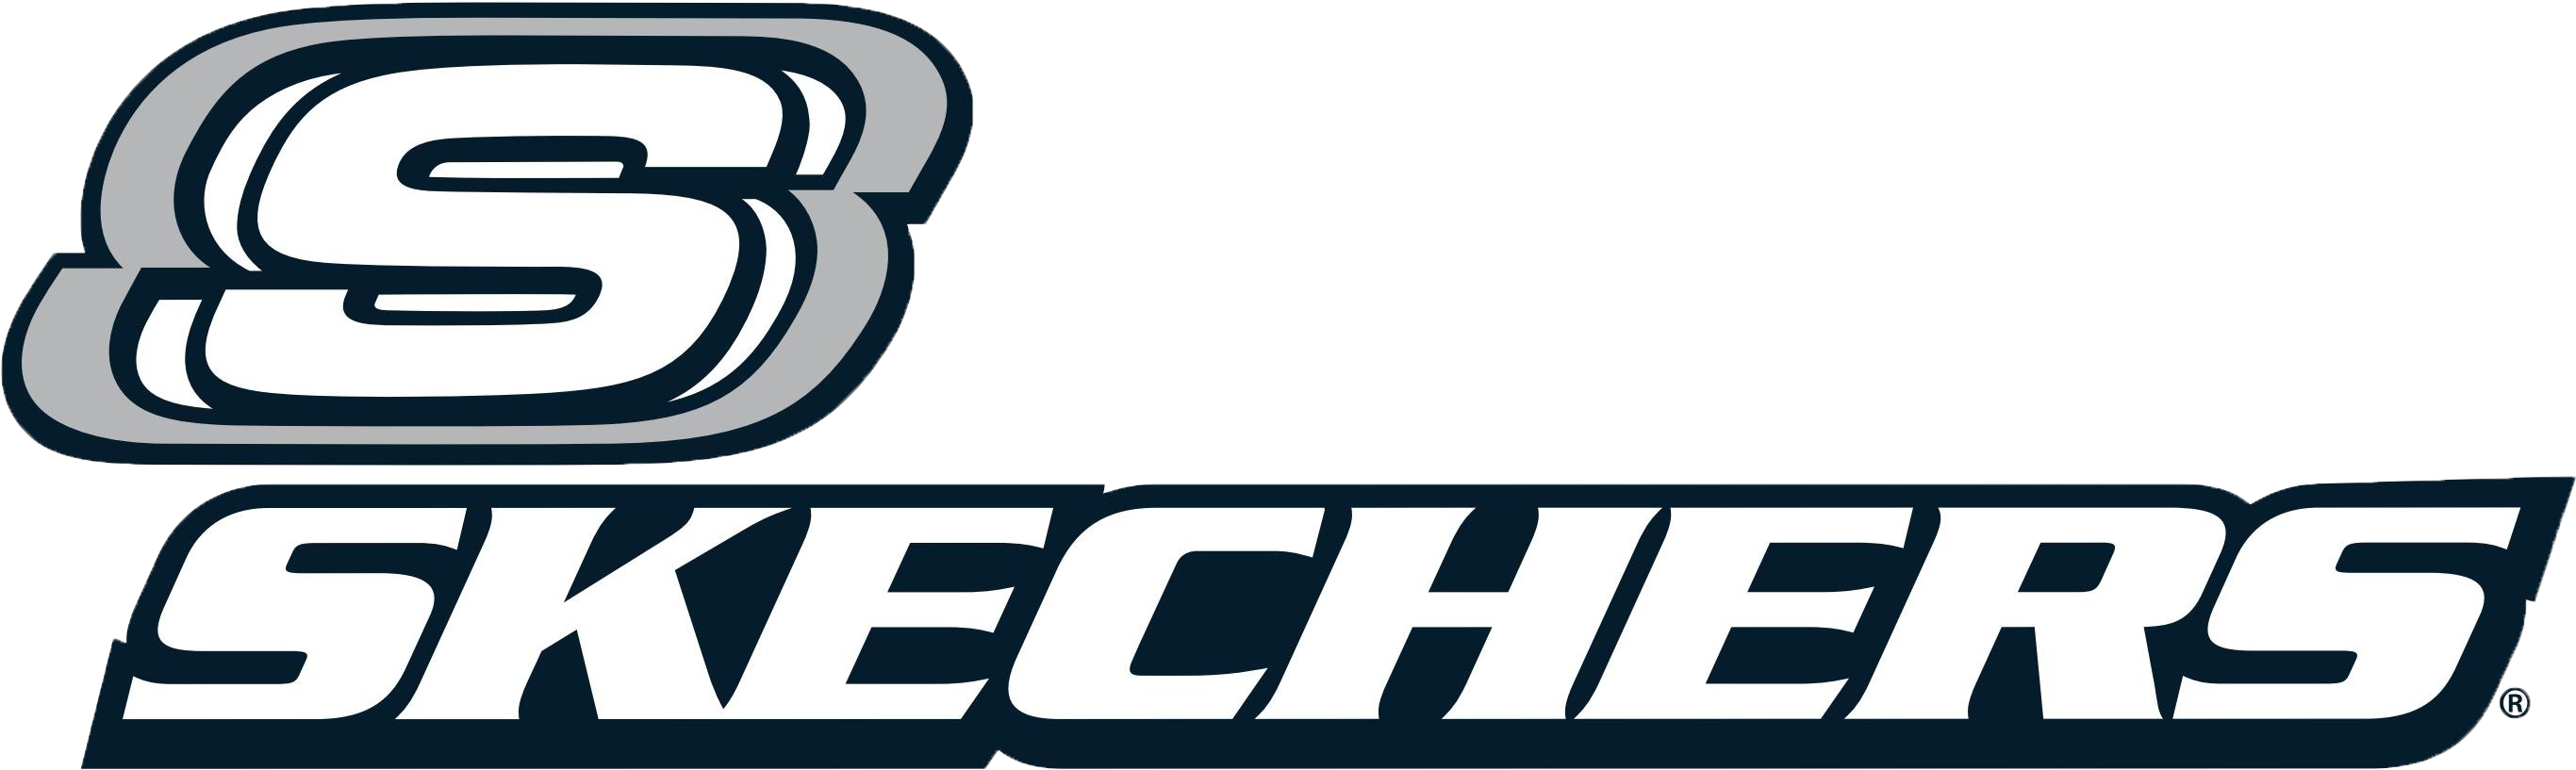 Download Skechers-logo Copy Skechers Brand PNG Image with No Background - PNGkey.com